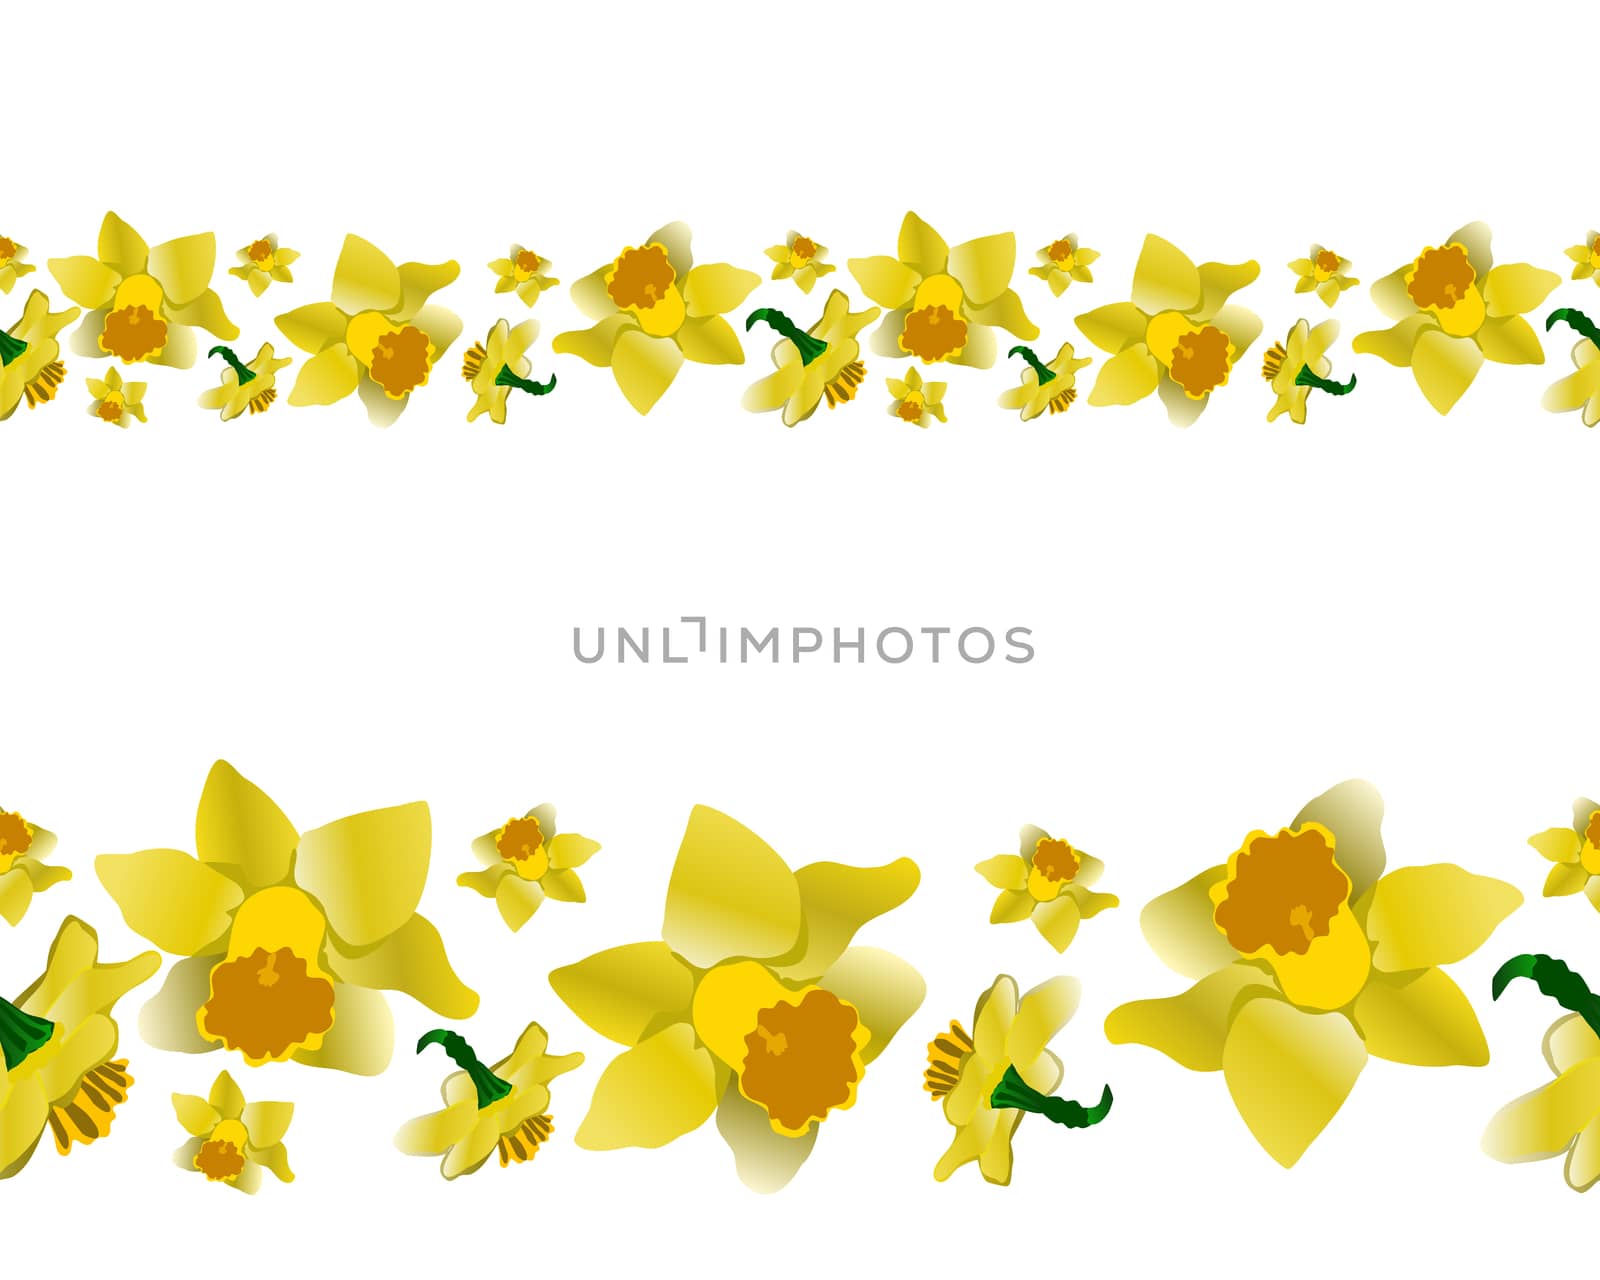 Spring yellow daffodils endless banner. Floral motif repeat border isolated on white background. Vector illustration.